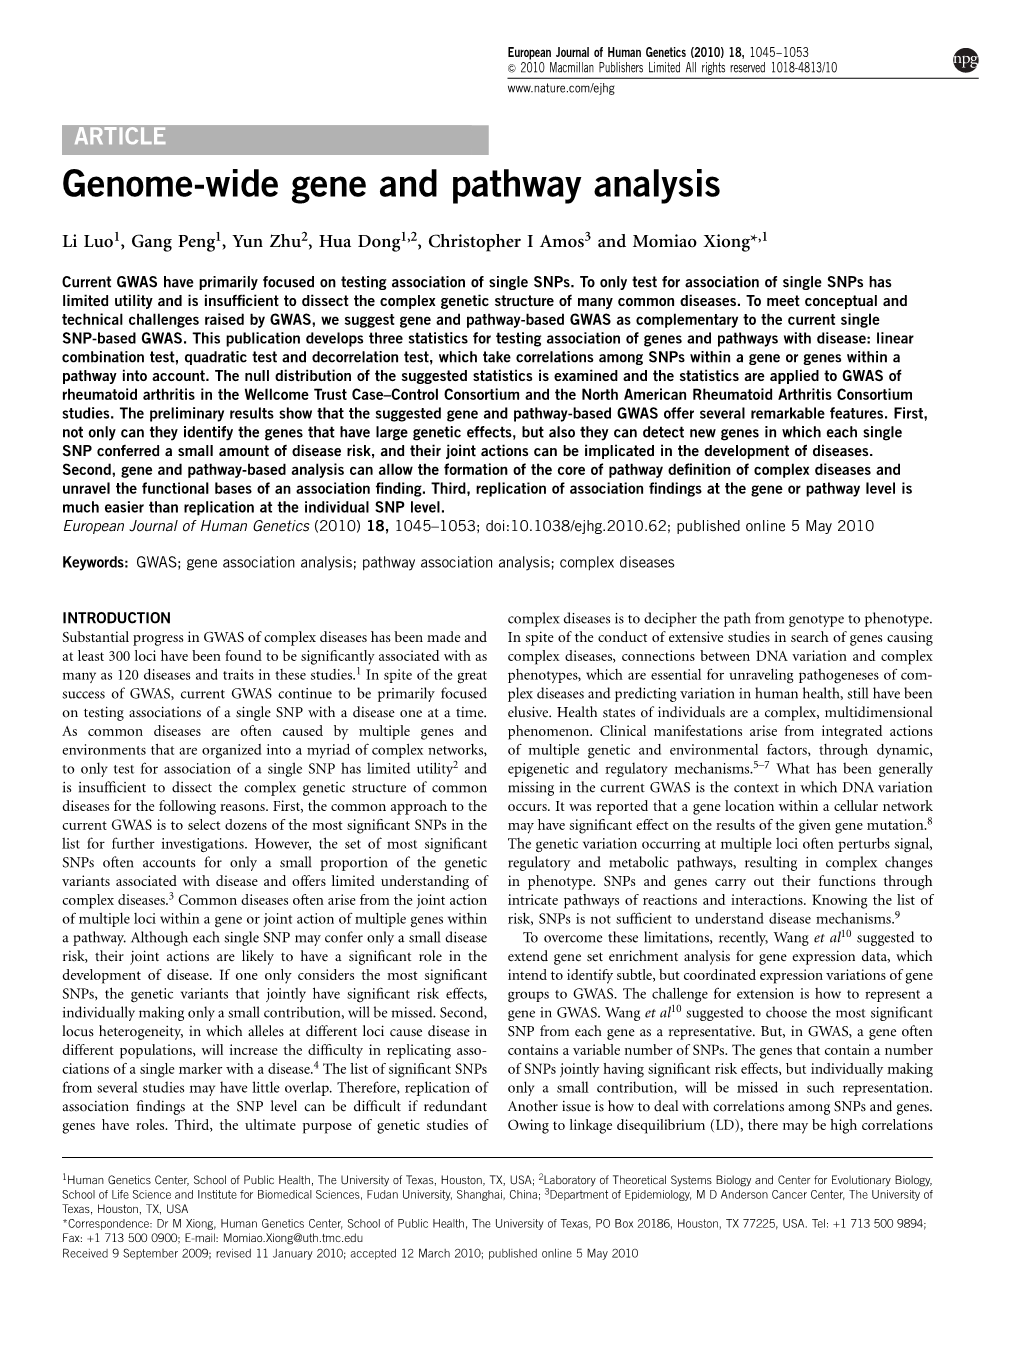 Genome-Wide Gene and Pathway Analysis